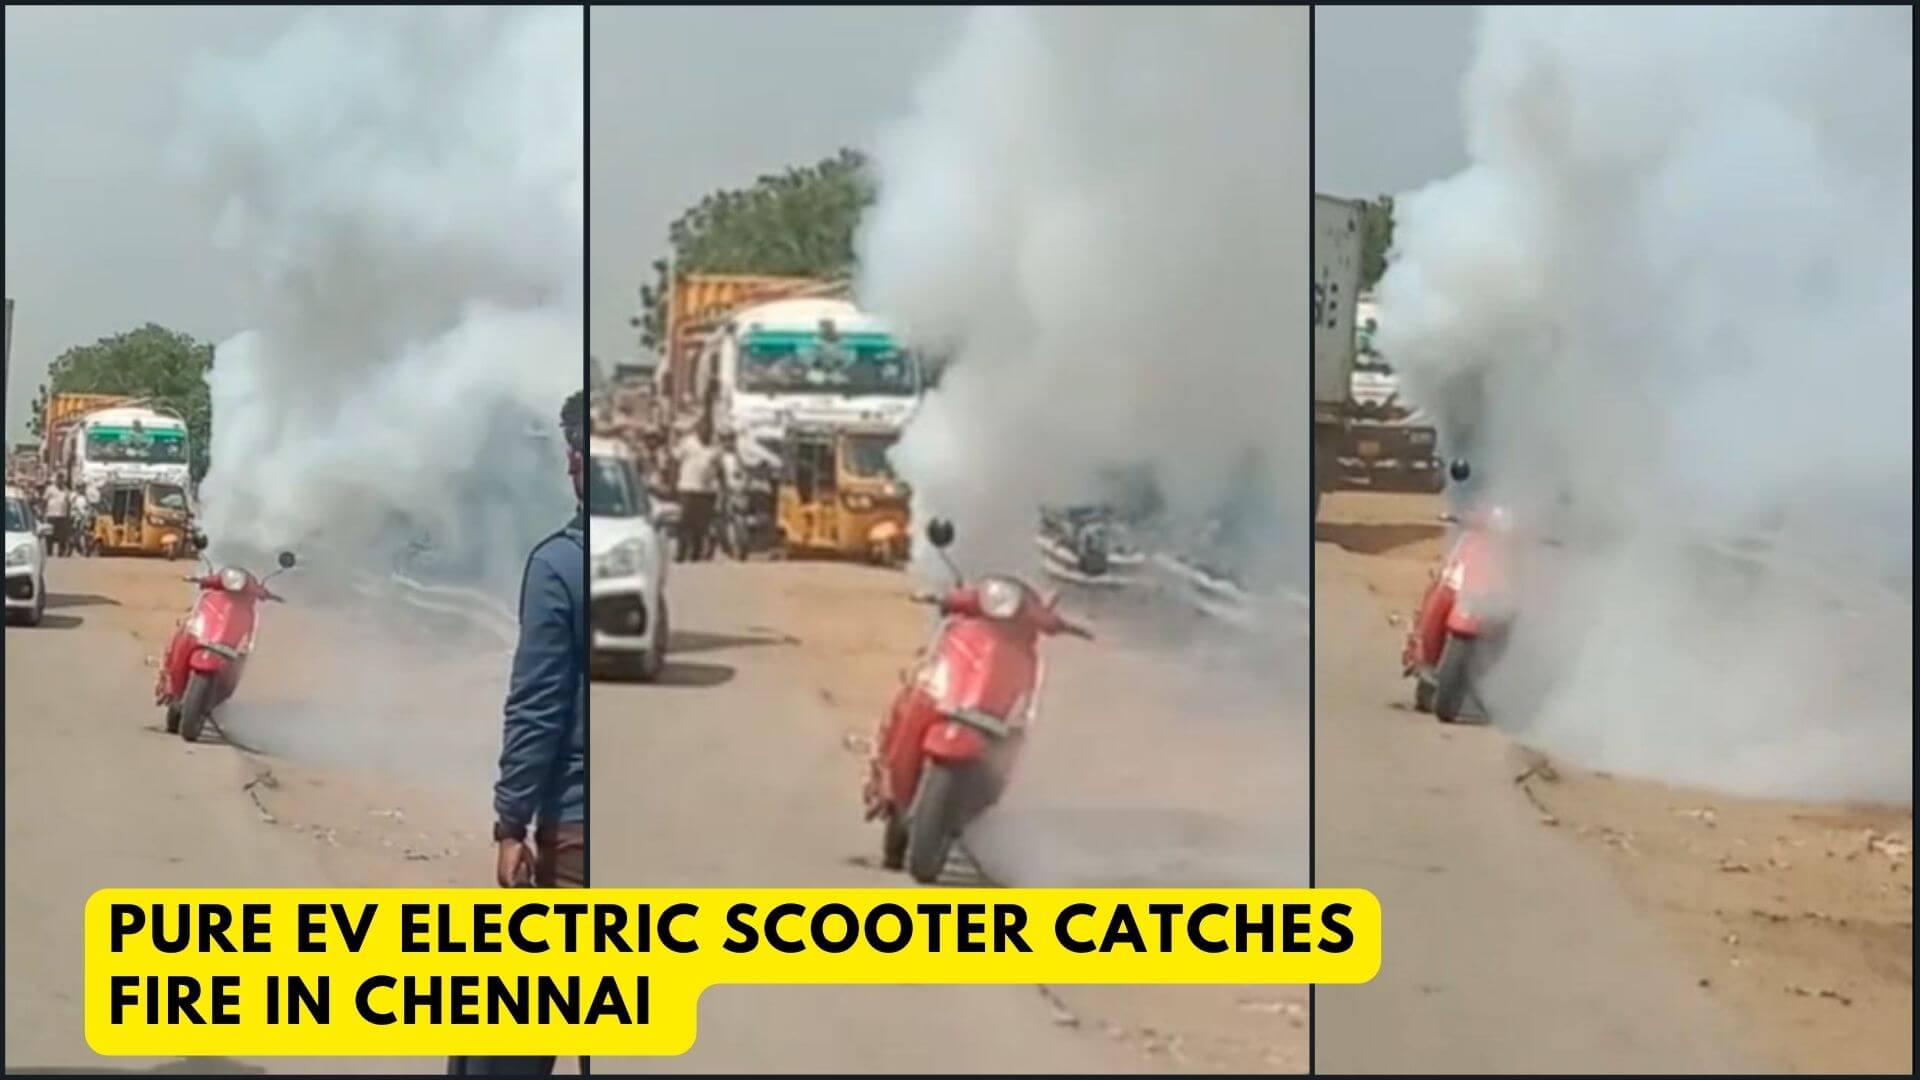 https://e-vehicleinfo.com/pure-ev-electric-scooter-catches-fire-in-chennai/